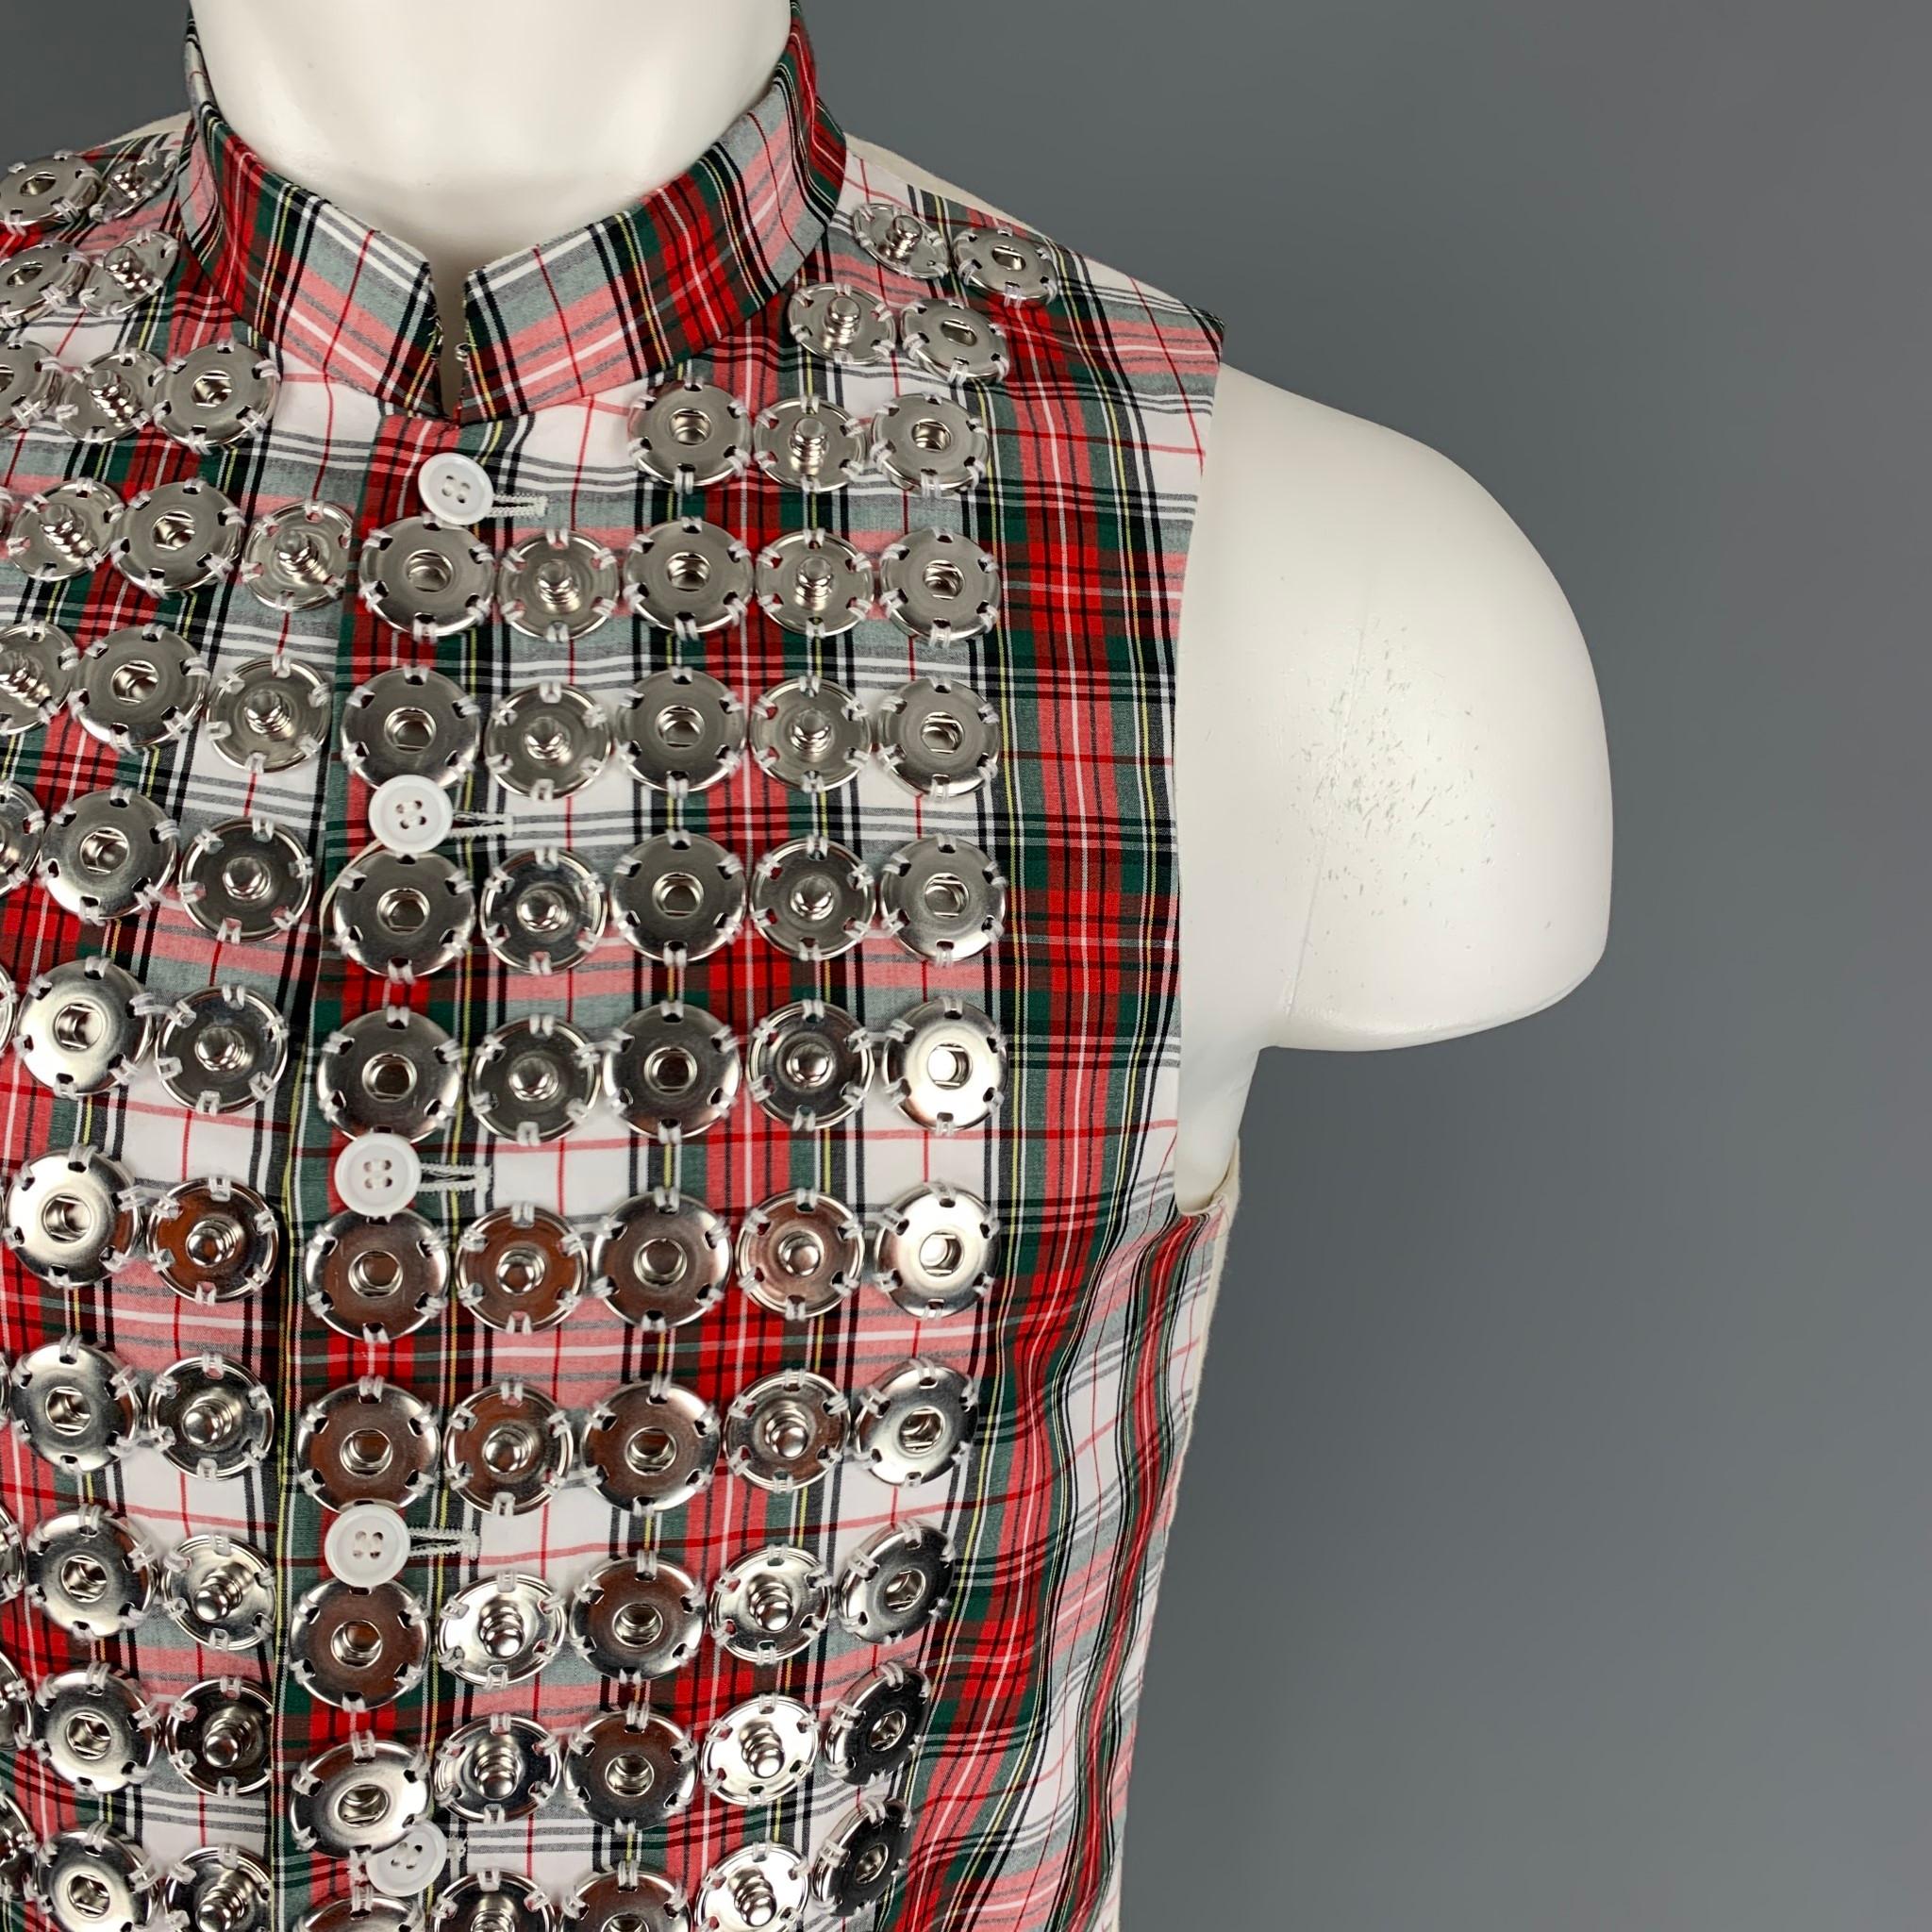 COMME des GARCONS HOMME PLUS vest comes in a white & red plaid cotton featuring silver tone hardware details, front pockets, back belt, collarless, and a buttoned closure. Made in Japan. 

New With Tags. 
Marked: M
Original Retail Price: